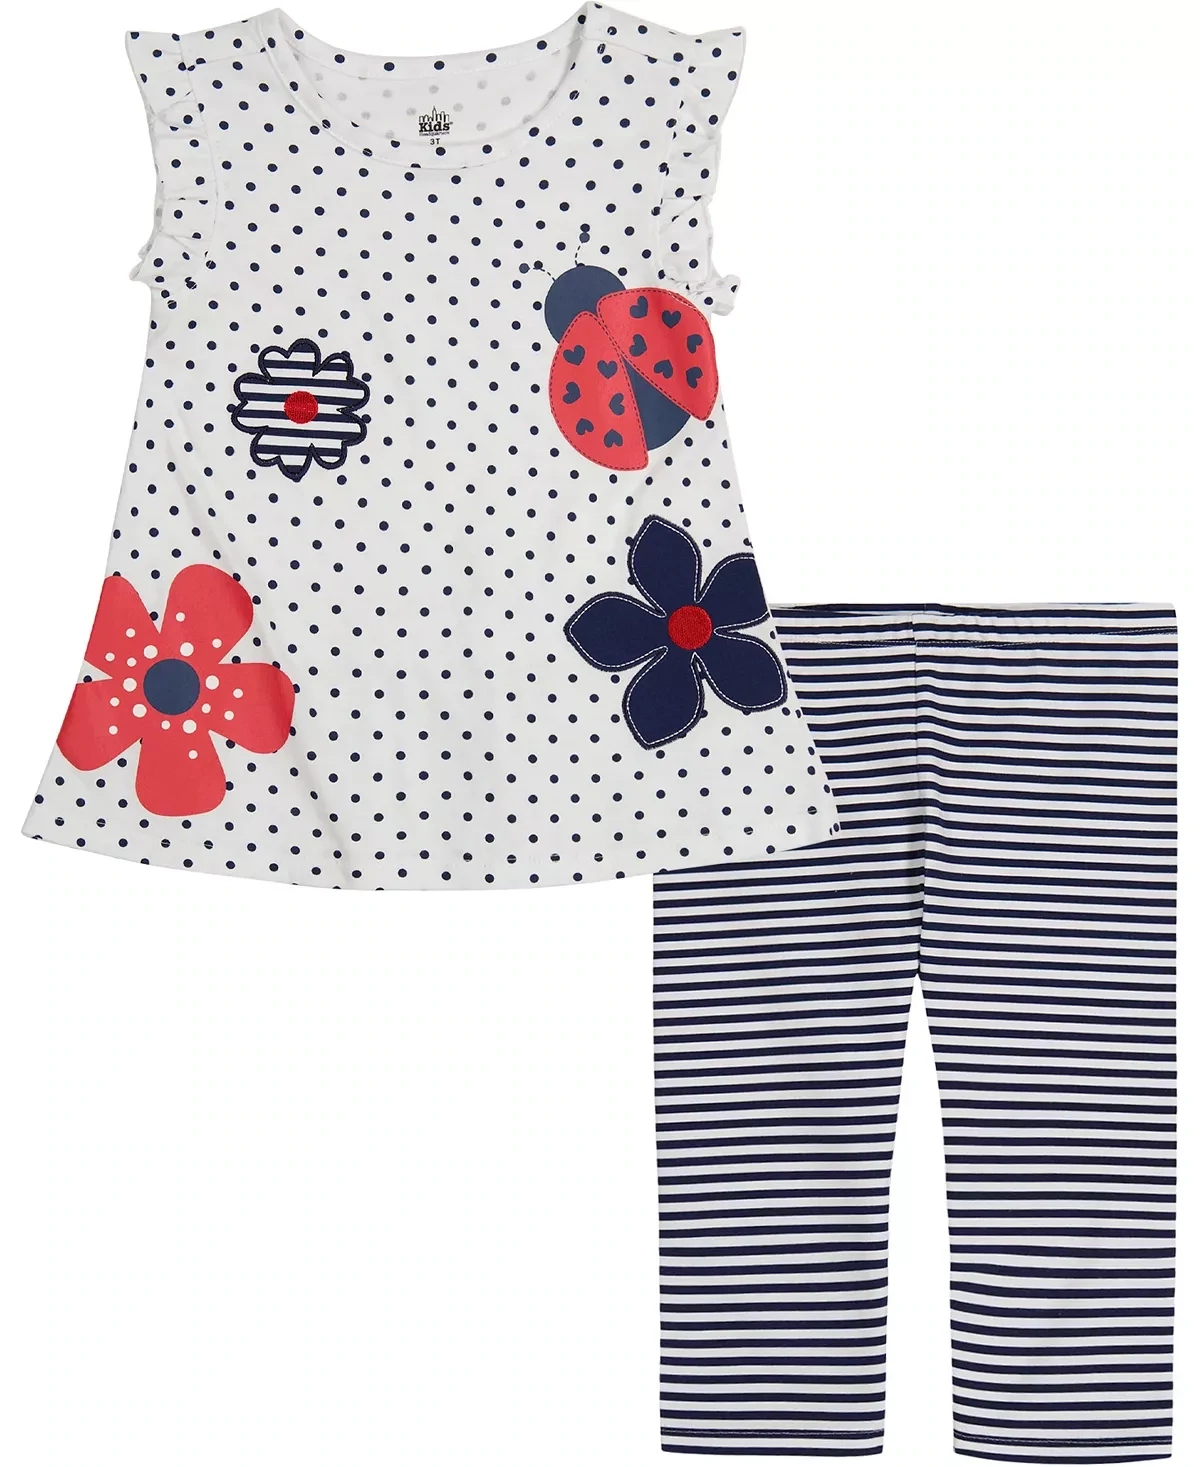 Kids Headquarters Baby Girls Polka-Dot Floral Tunic and Striped Capri Leggings, 2 Piece Set - Size 12 Months